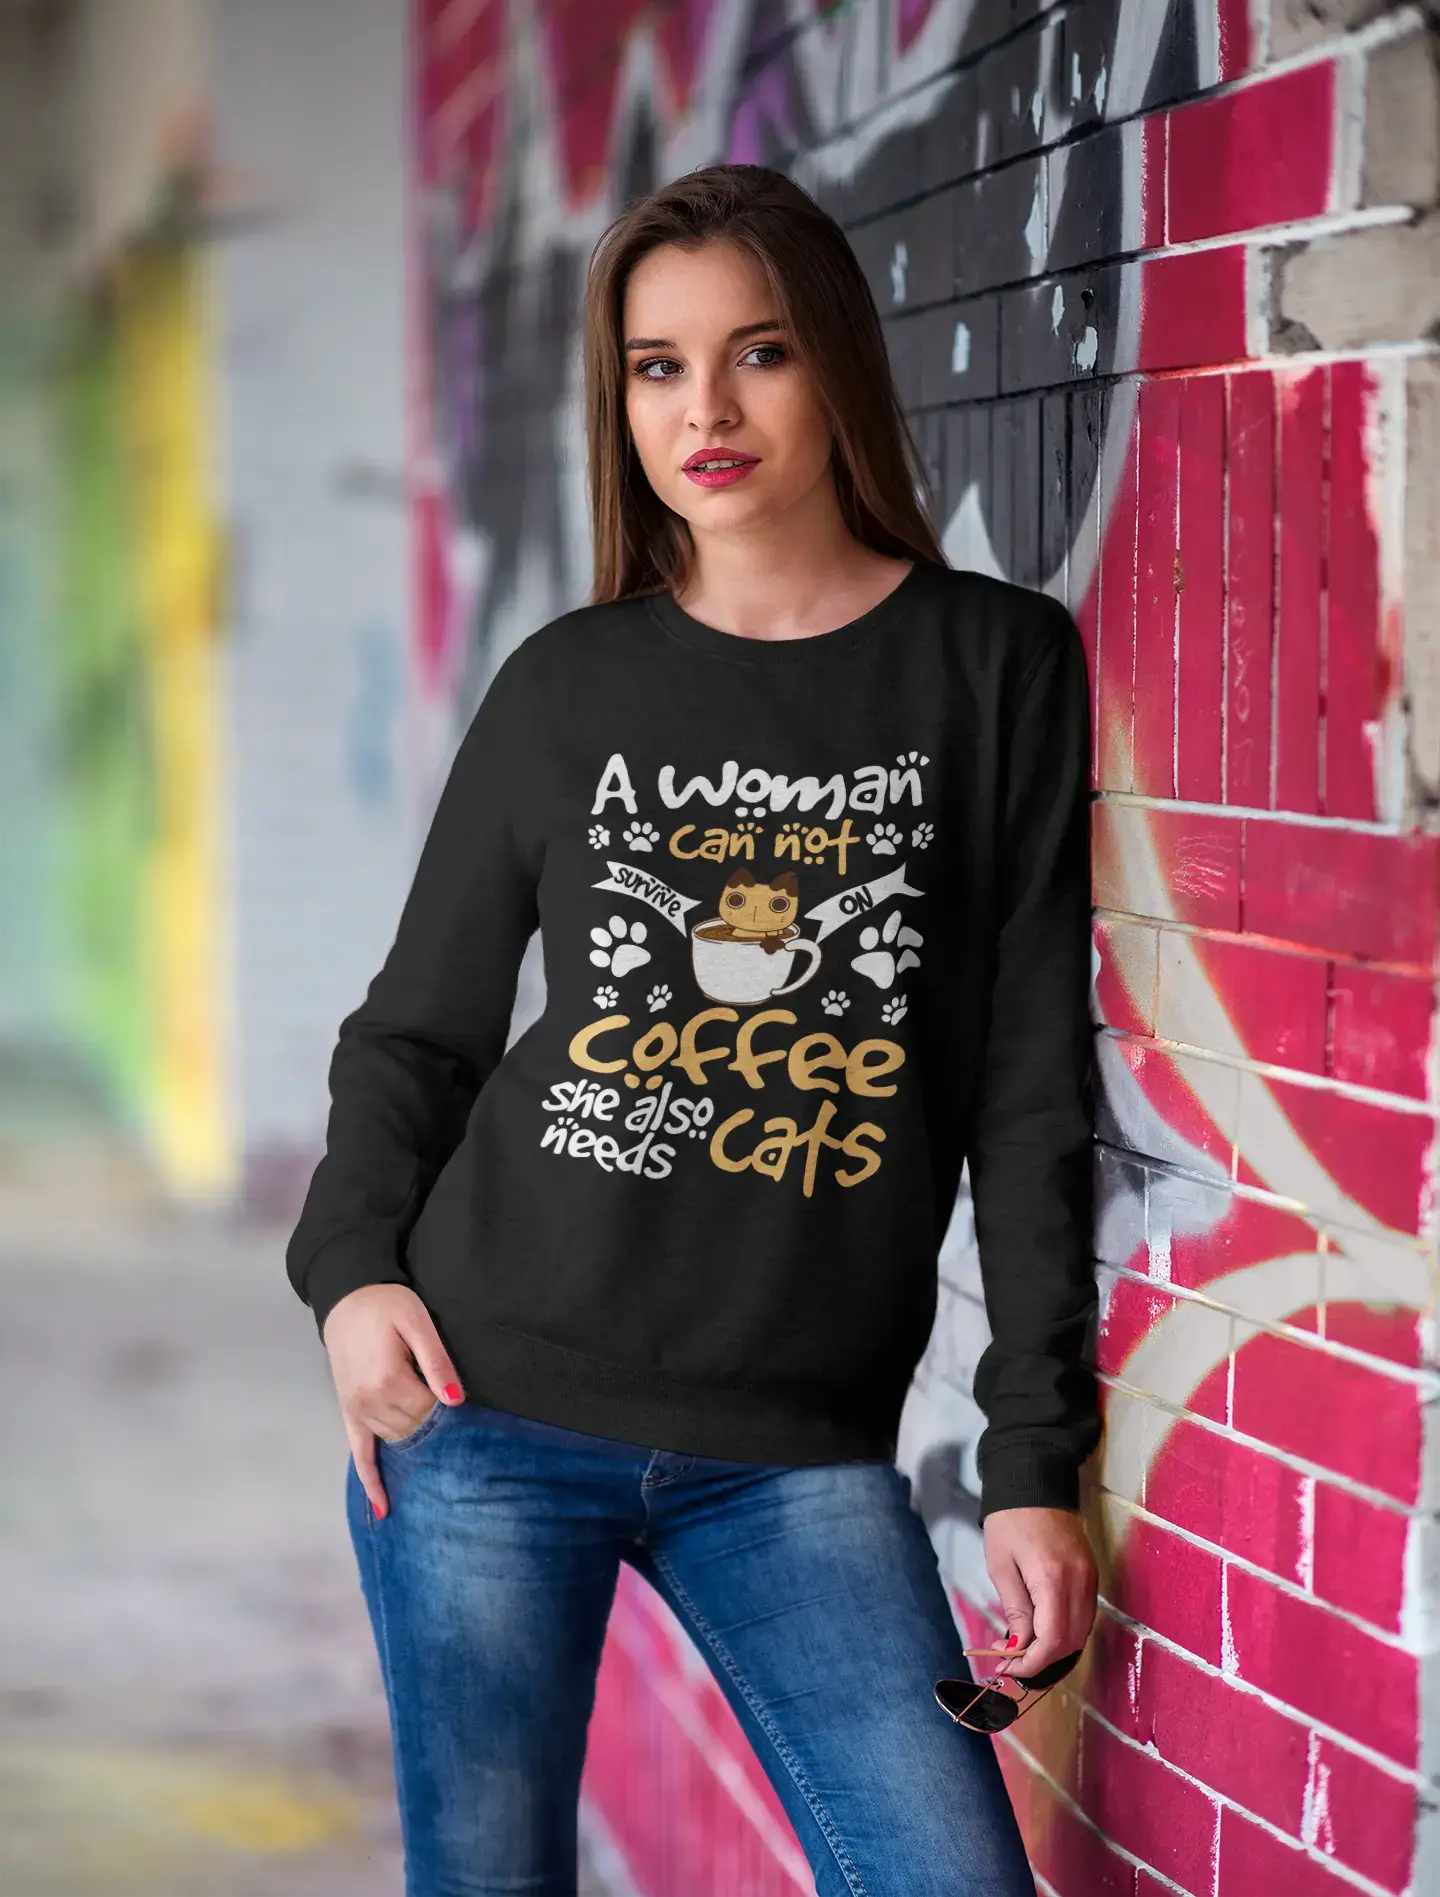 ULTRABASIC Damen-Sweatshirt „Can Not Survive on Coffee She Also Need Cats“ – lustiger Kitty-Pullover